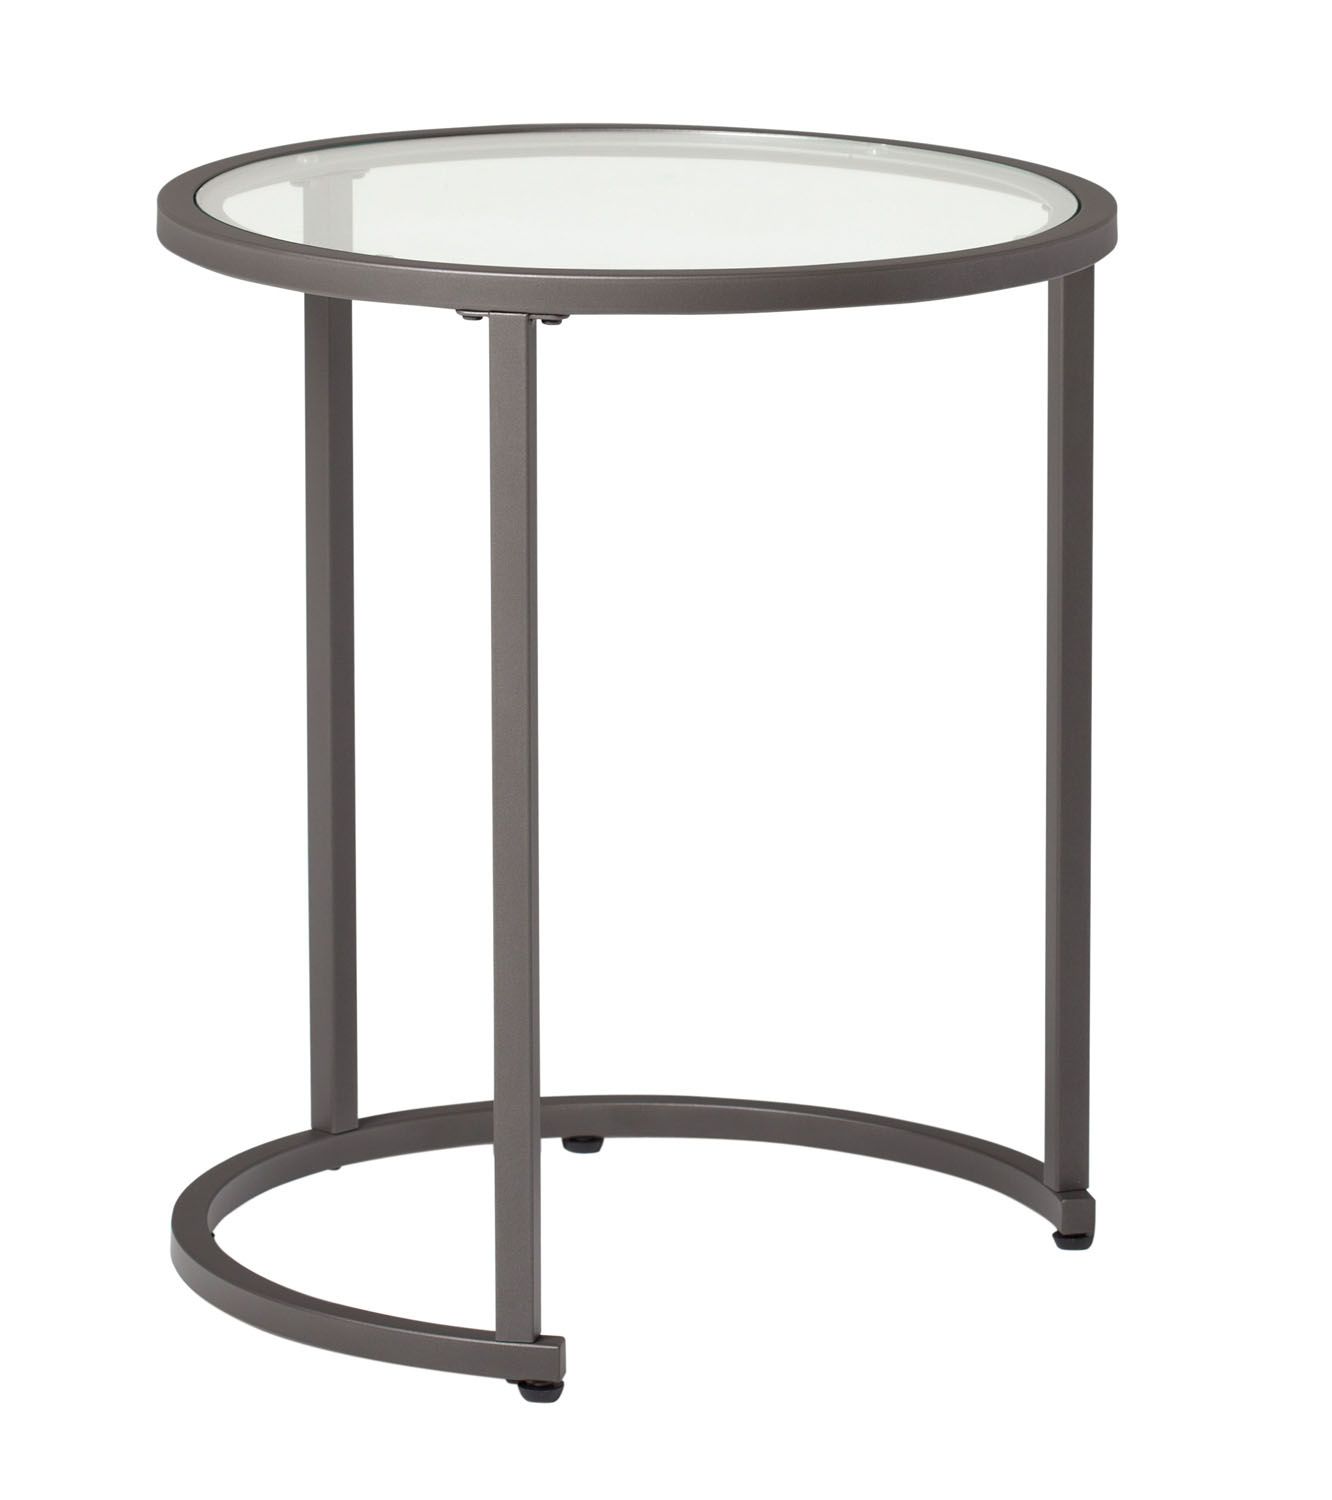 Offex Modern Glass Round Nesting Tables In Pewter 20 Inches – Walmart Within Glass And Pewter Rectangular Desks (View 3 of 15)